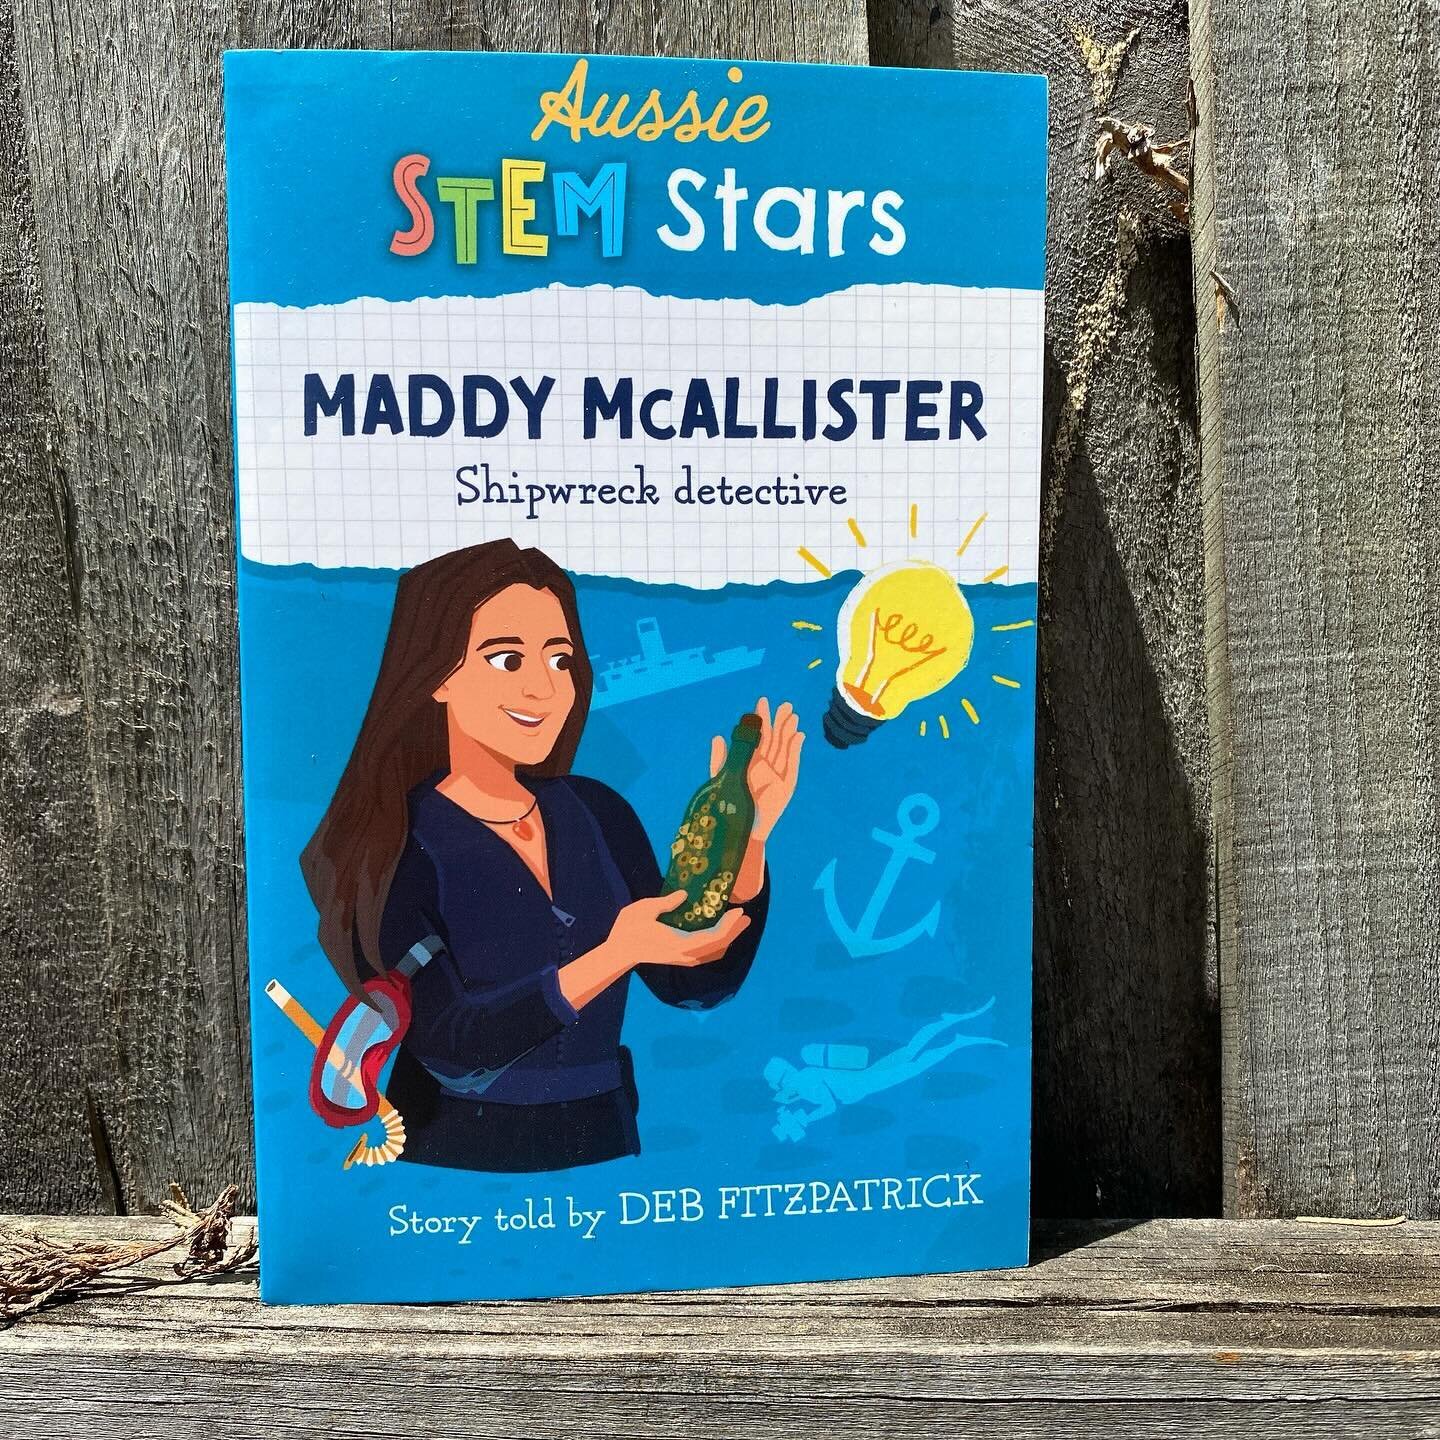 Maddy McAllister&rsquo;s story will be in bookshops this week. Deb Fitzpatrick tells the story of our very own shipwreck detective. It&rsquo;s a wonderful story for middle-grade readers. 

Read more about the book on our website. Link in bio. 

#ship